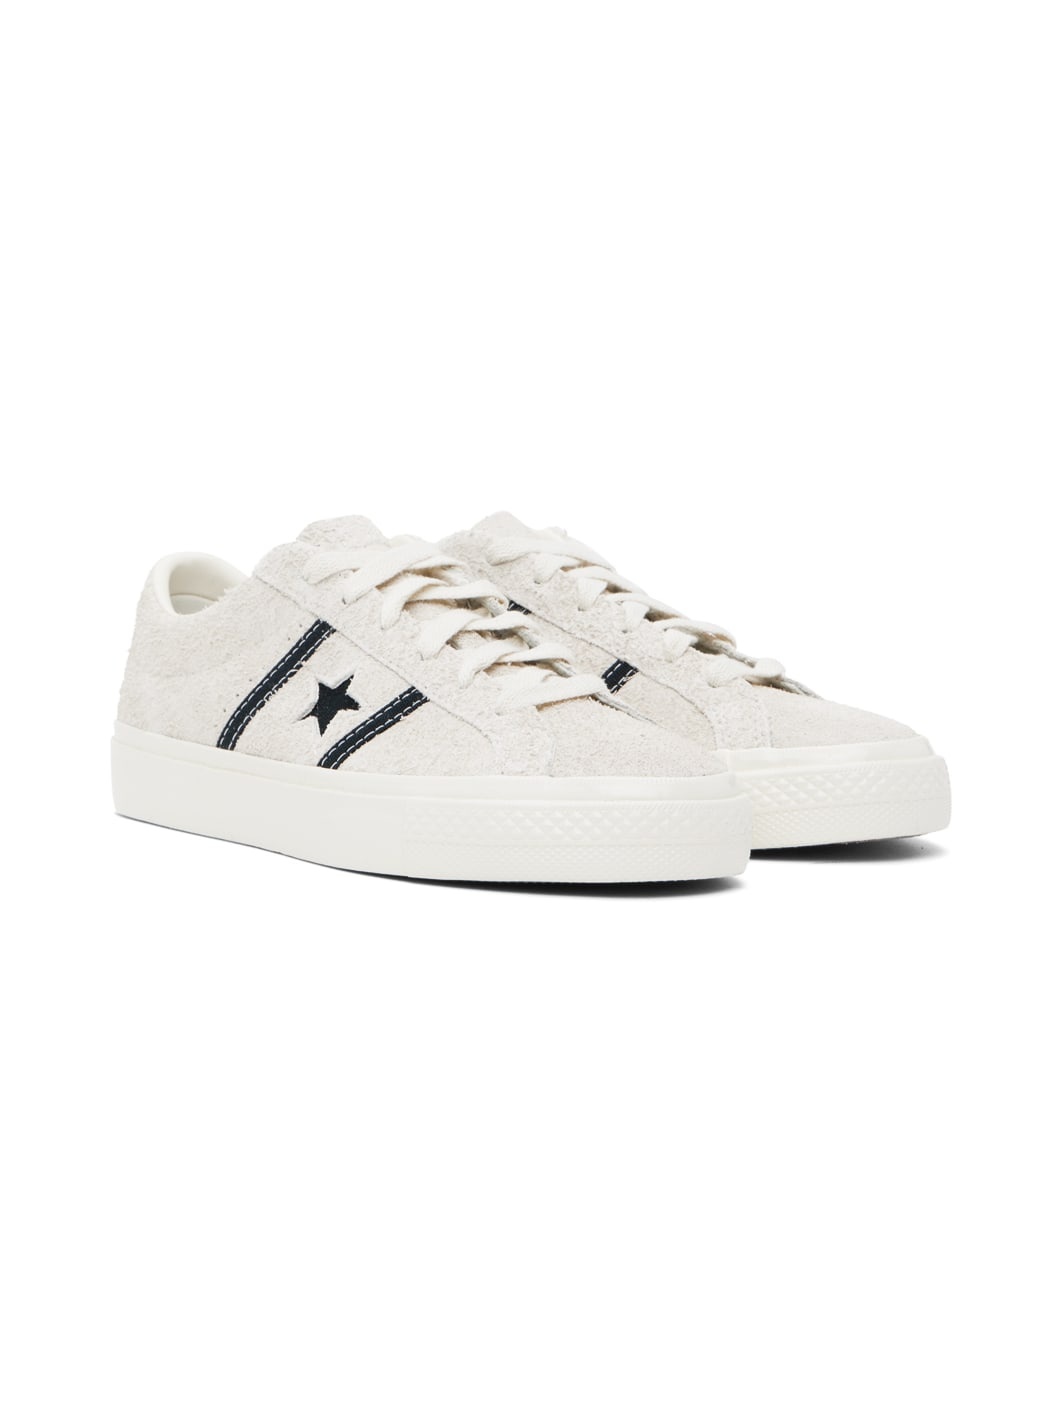 Taupe One Star Academy Pro Suede Low Top Sneakers - 4